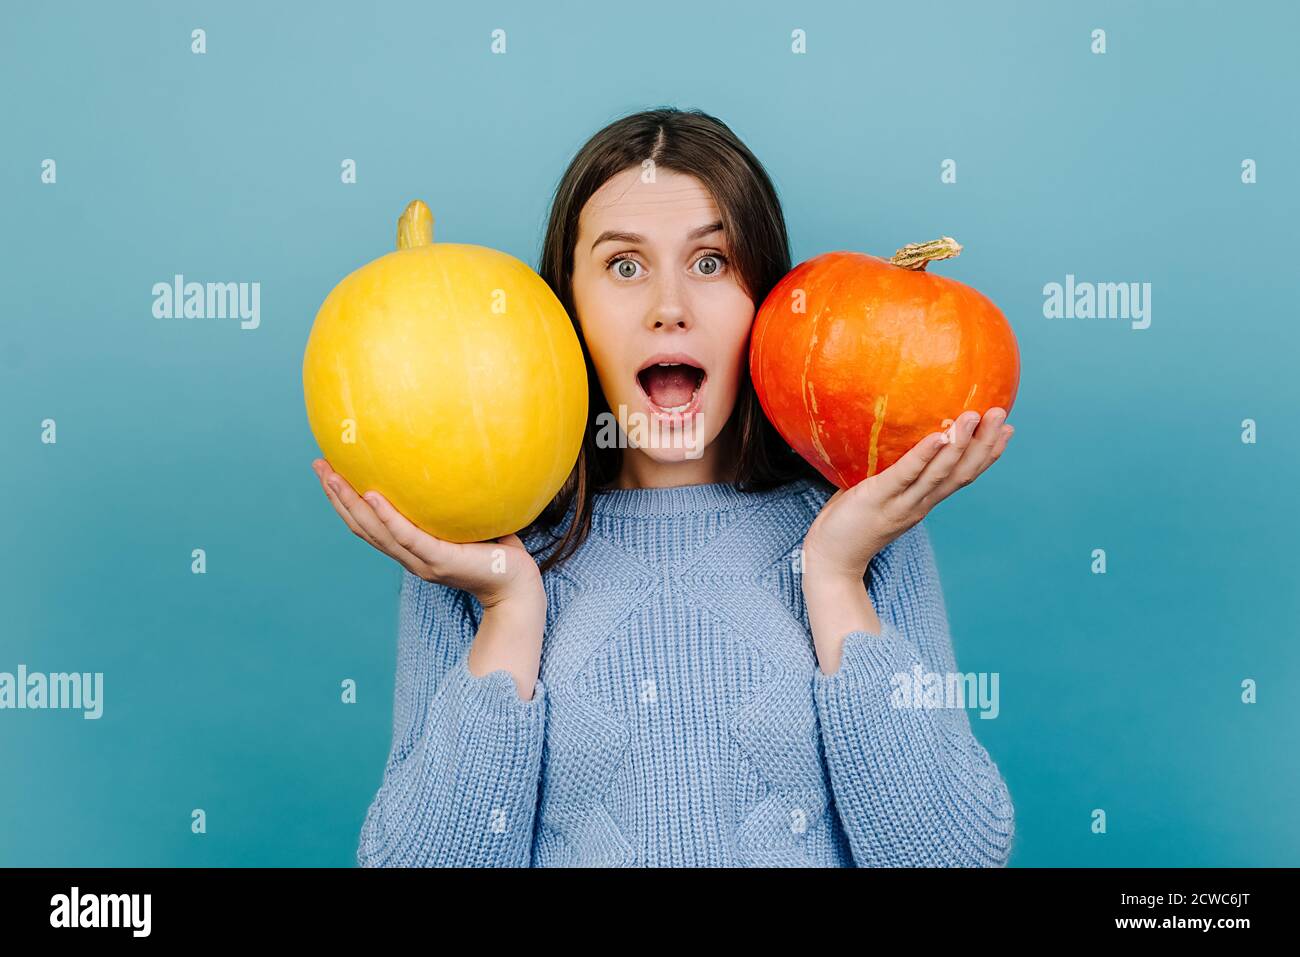 Portrait of emotional attractive young woman with open mouth, holding two small pumpkins near face, surprised looking at camera, dressed in sweater Stock Photo